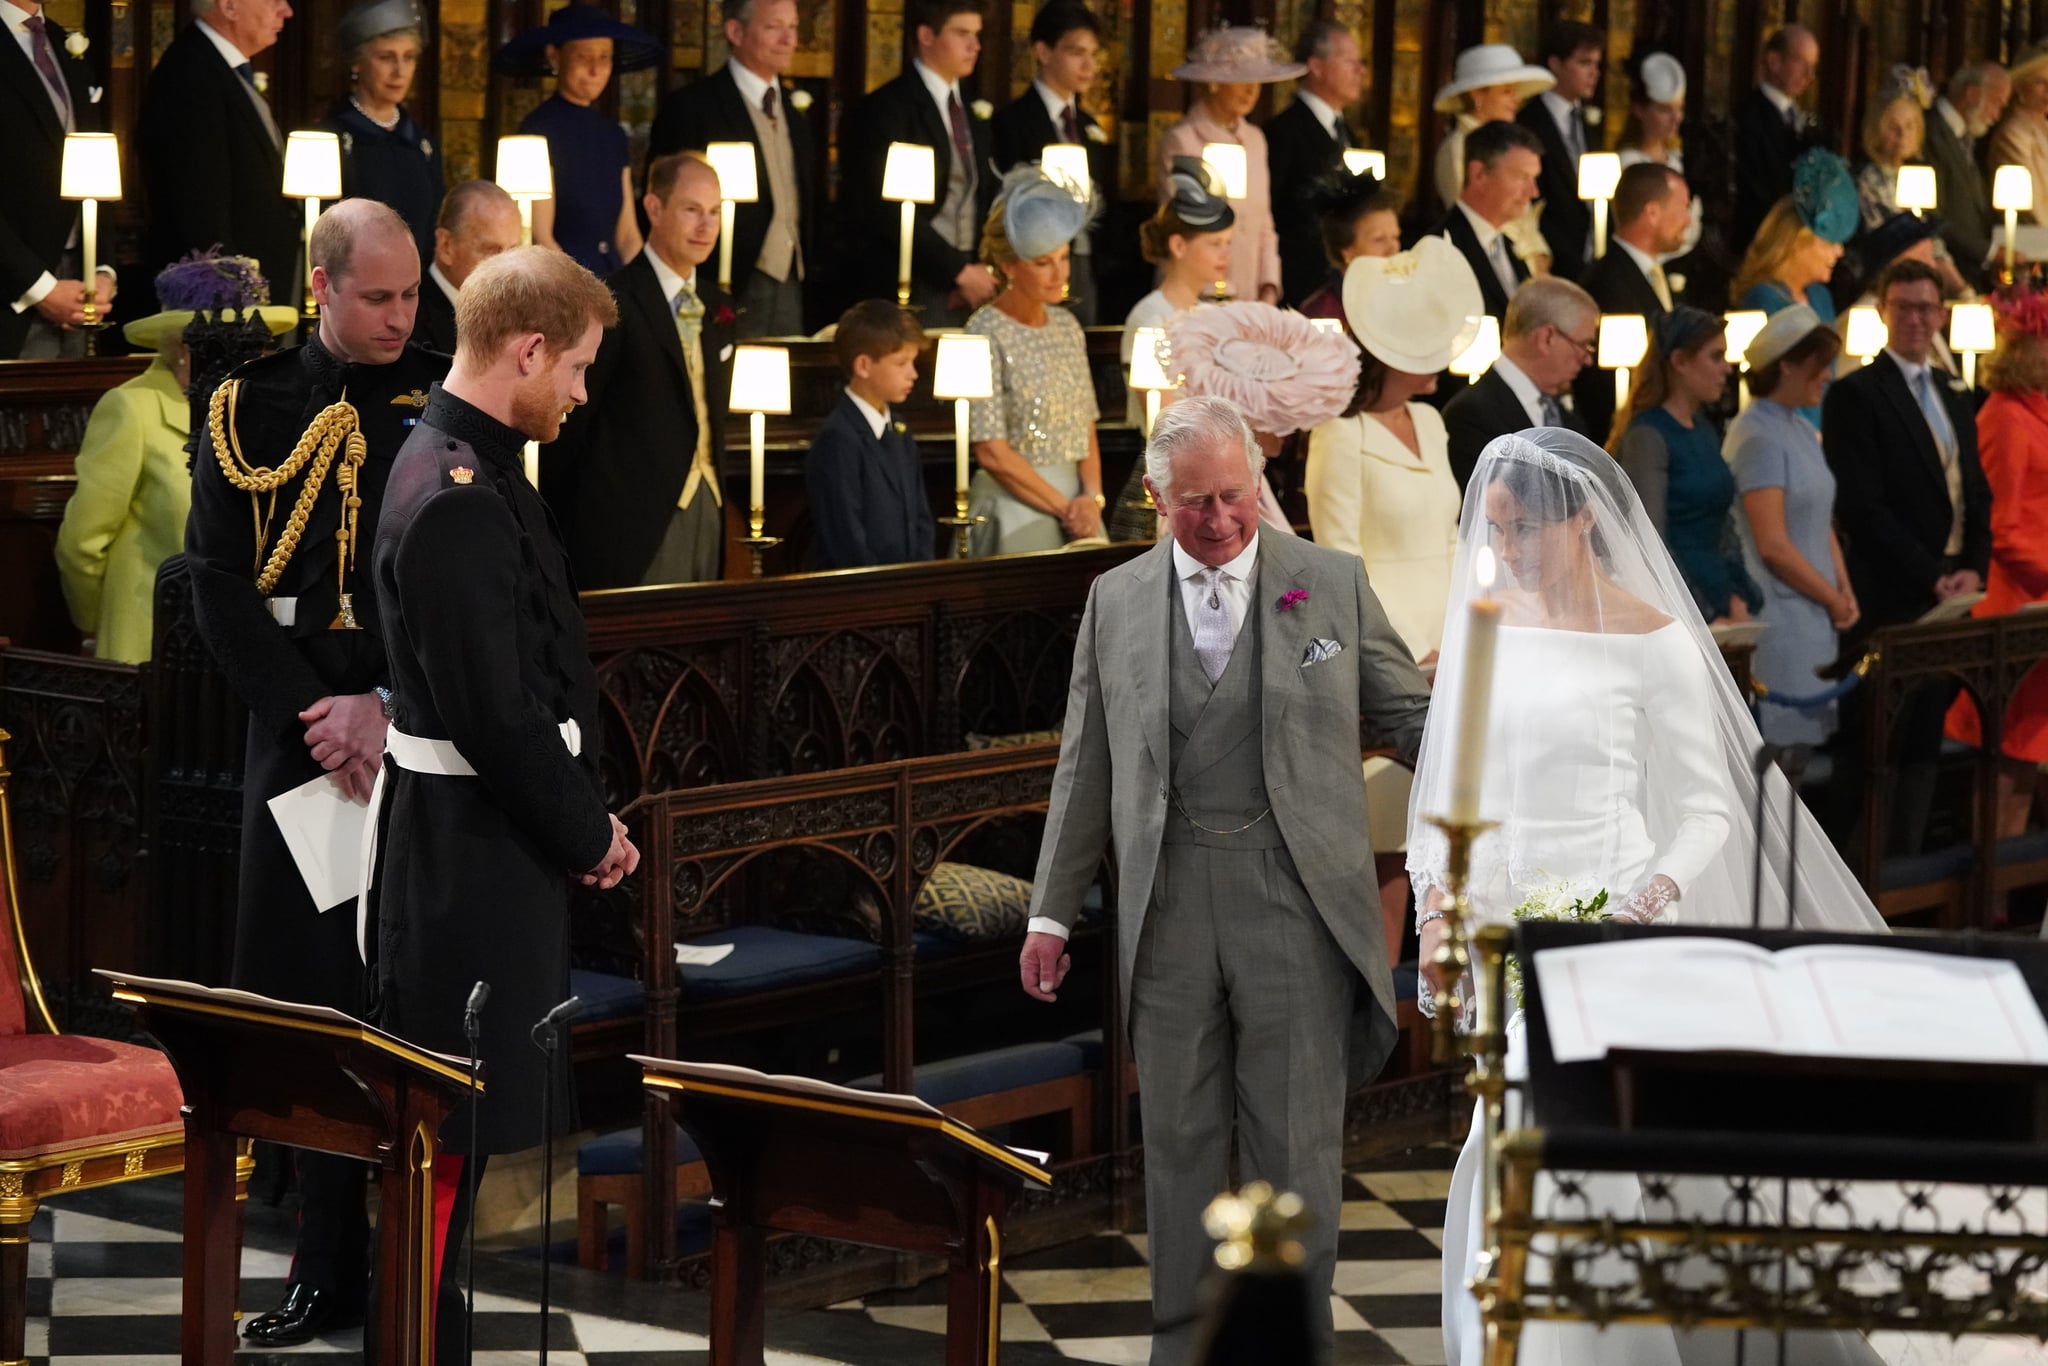 WINDSOR, UNITED KINGDOM - MAY 19:  Prince Harry looks at his bride, Meghan Markle, as she arrives accompanied by Prince Charles, Prince of Wales during their wedding in St George's Chapel at Windsor Castle on May 19, 2018 in Windsor, England. (Photo by Jonathan Brady - WPA Pool/Getty Images)